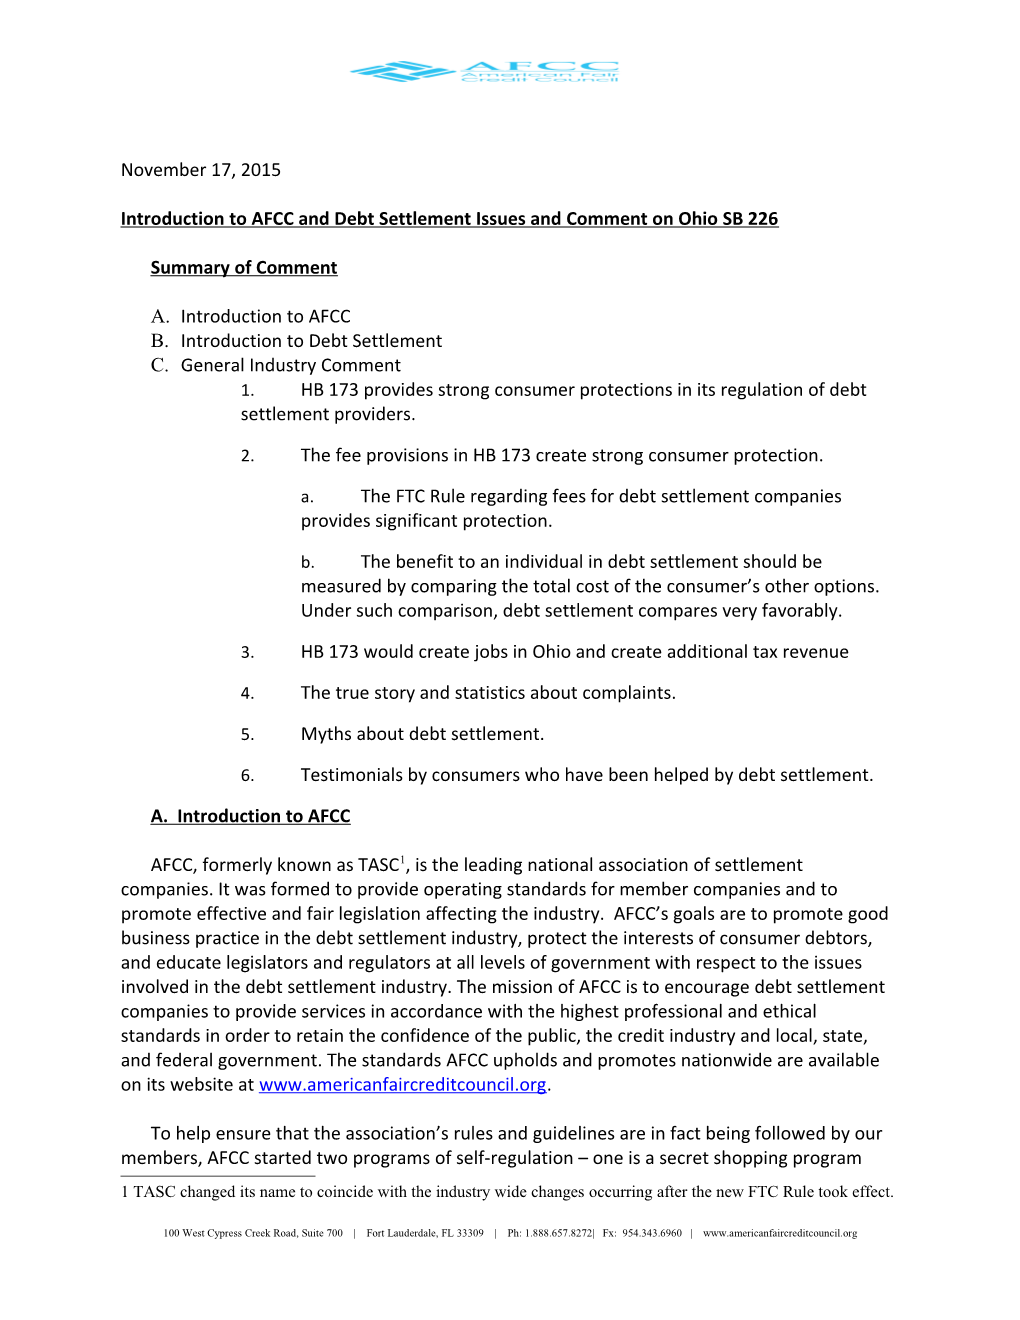 Introduction to Afccand Debt Settlement Issues and Comment on Ohio SB 226